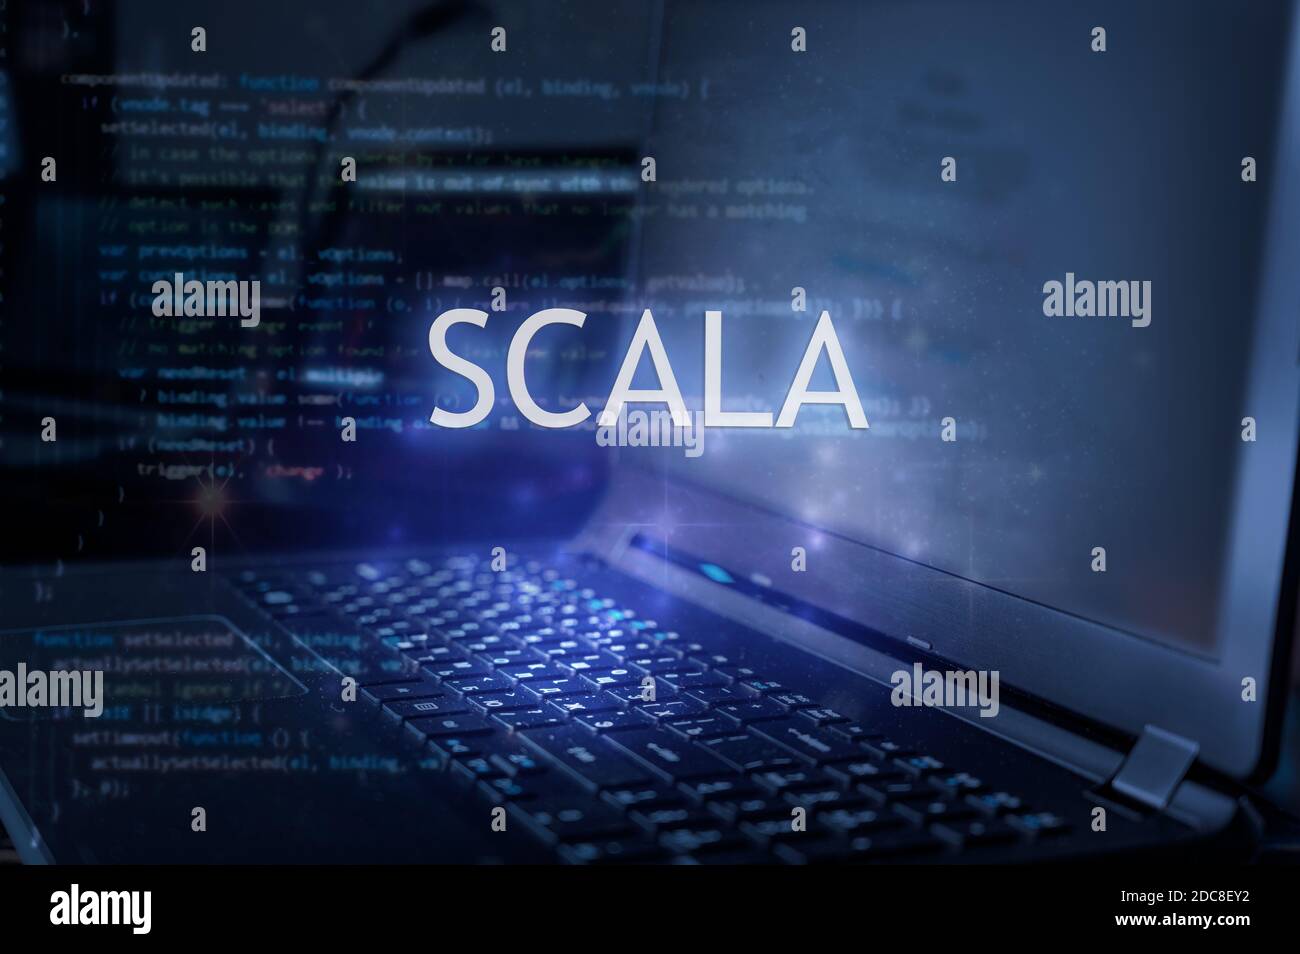 Scala inscription against laptop and code background. Learn scala programming language, computer courses, training. Stock Photo